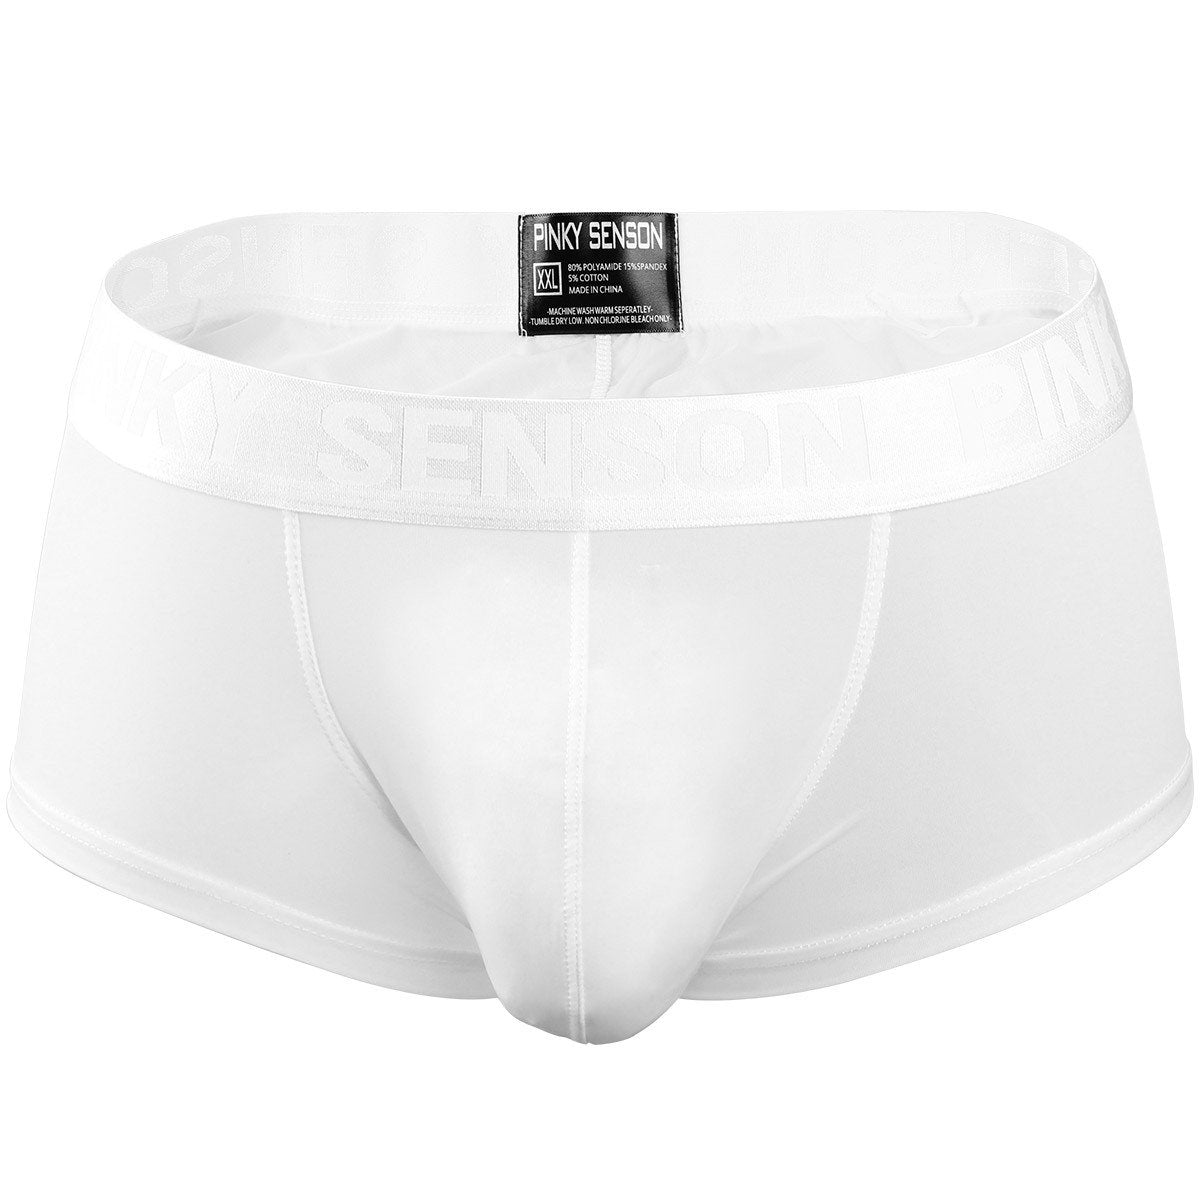 Men's Ice Silk thin Low-rise Solid Boxer Briefs